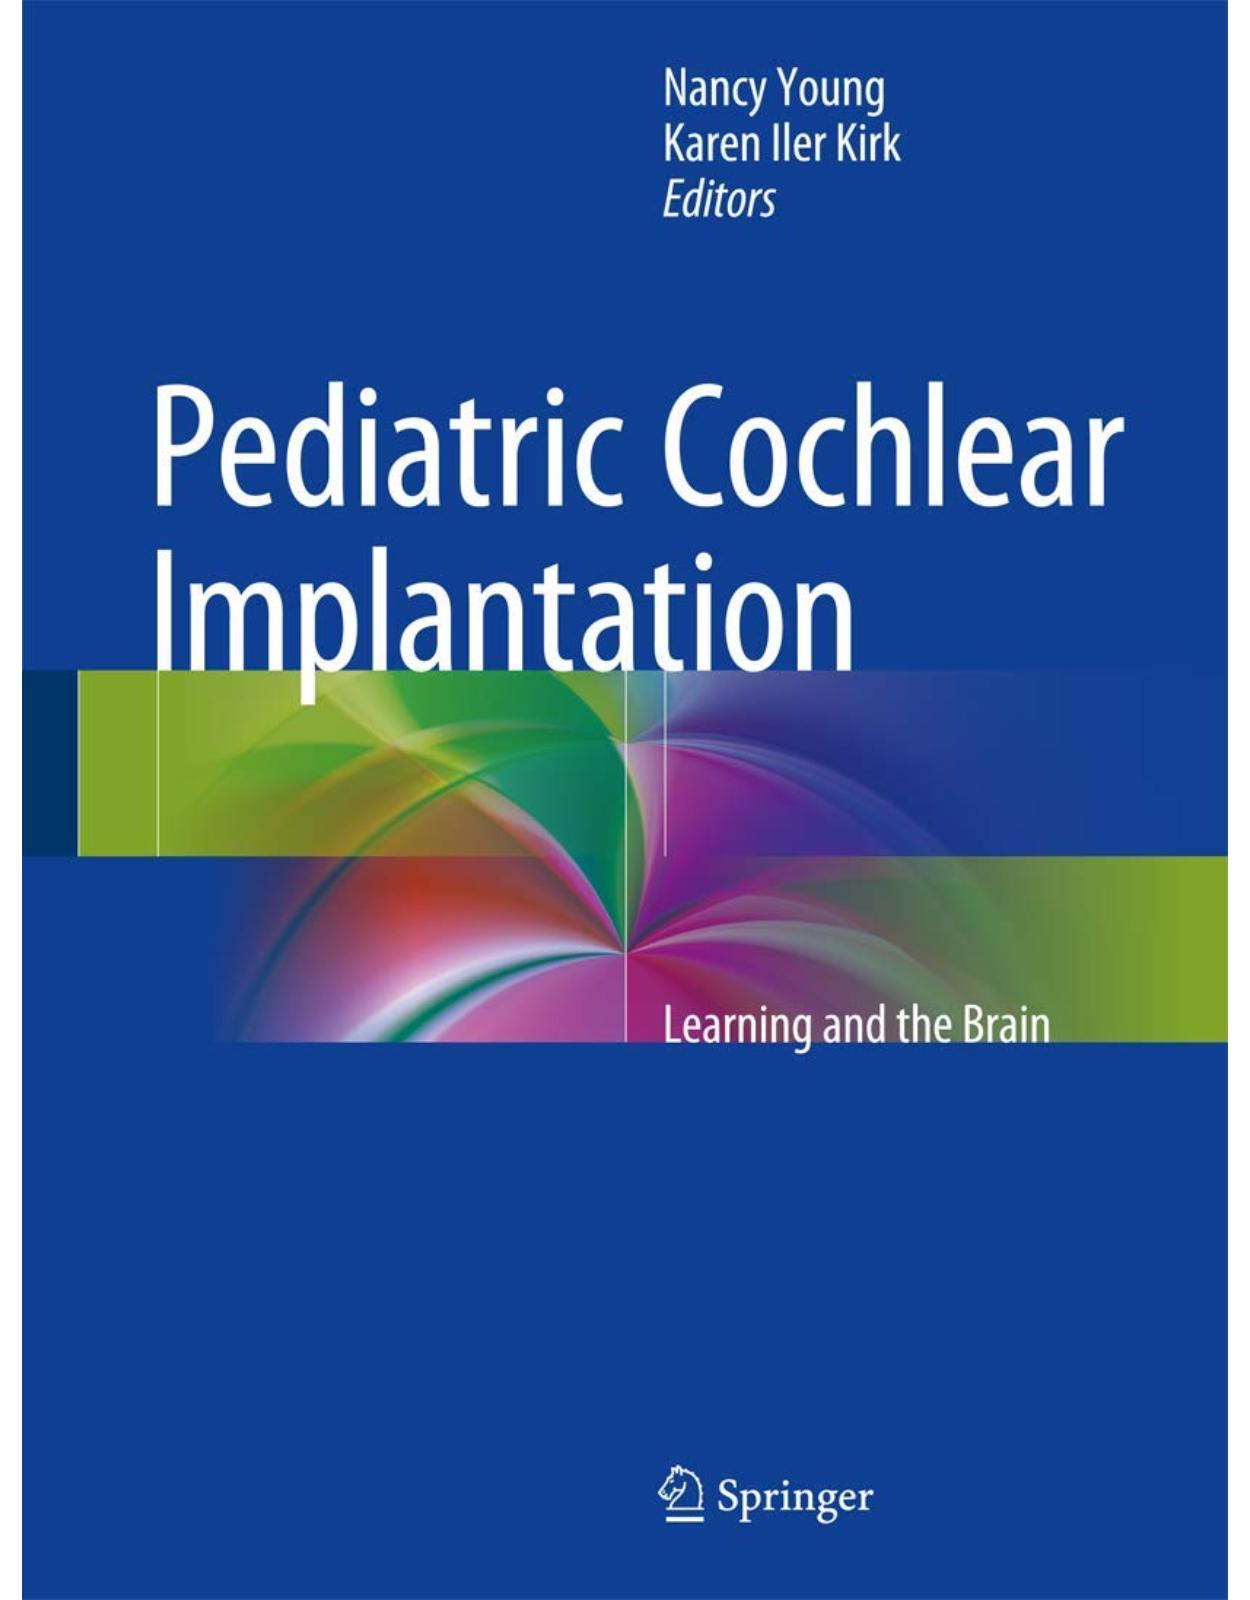 Pediatric Cochlear Implantation: Learning and the Brain